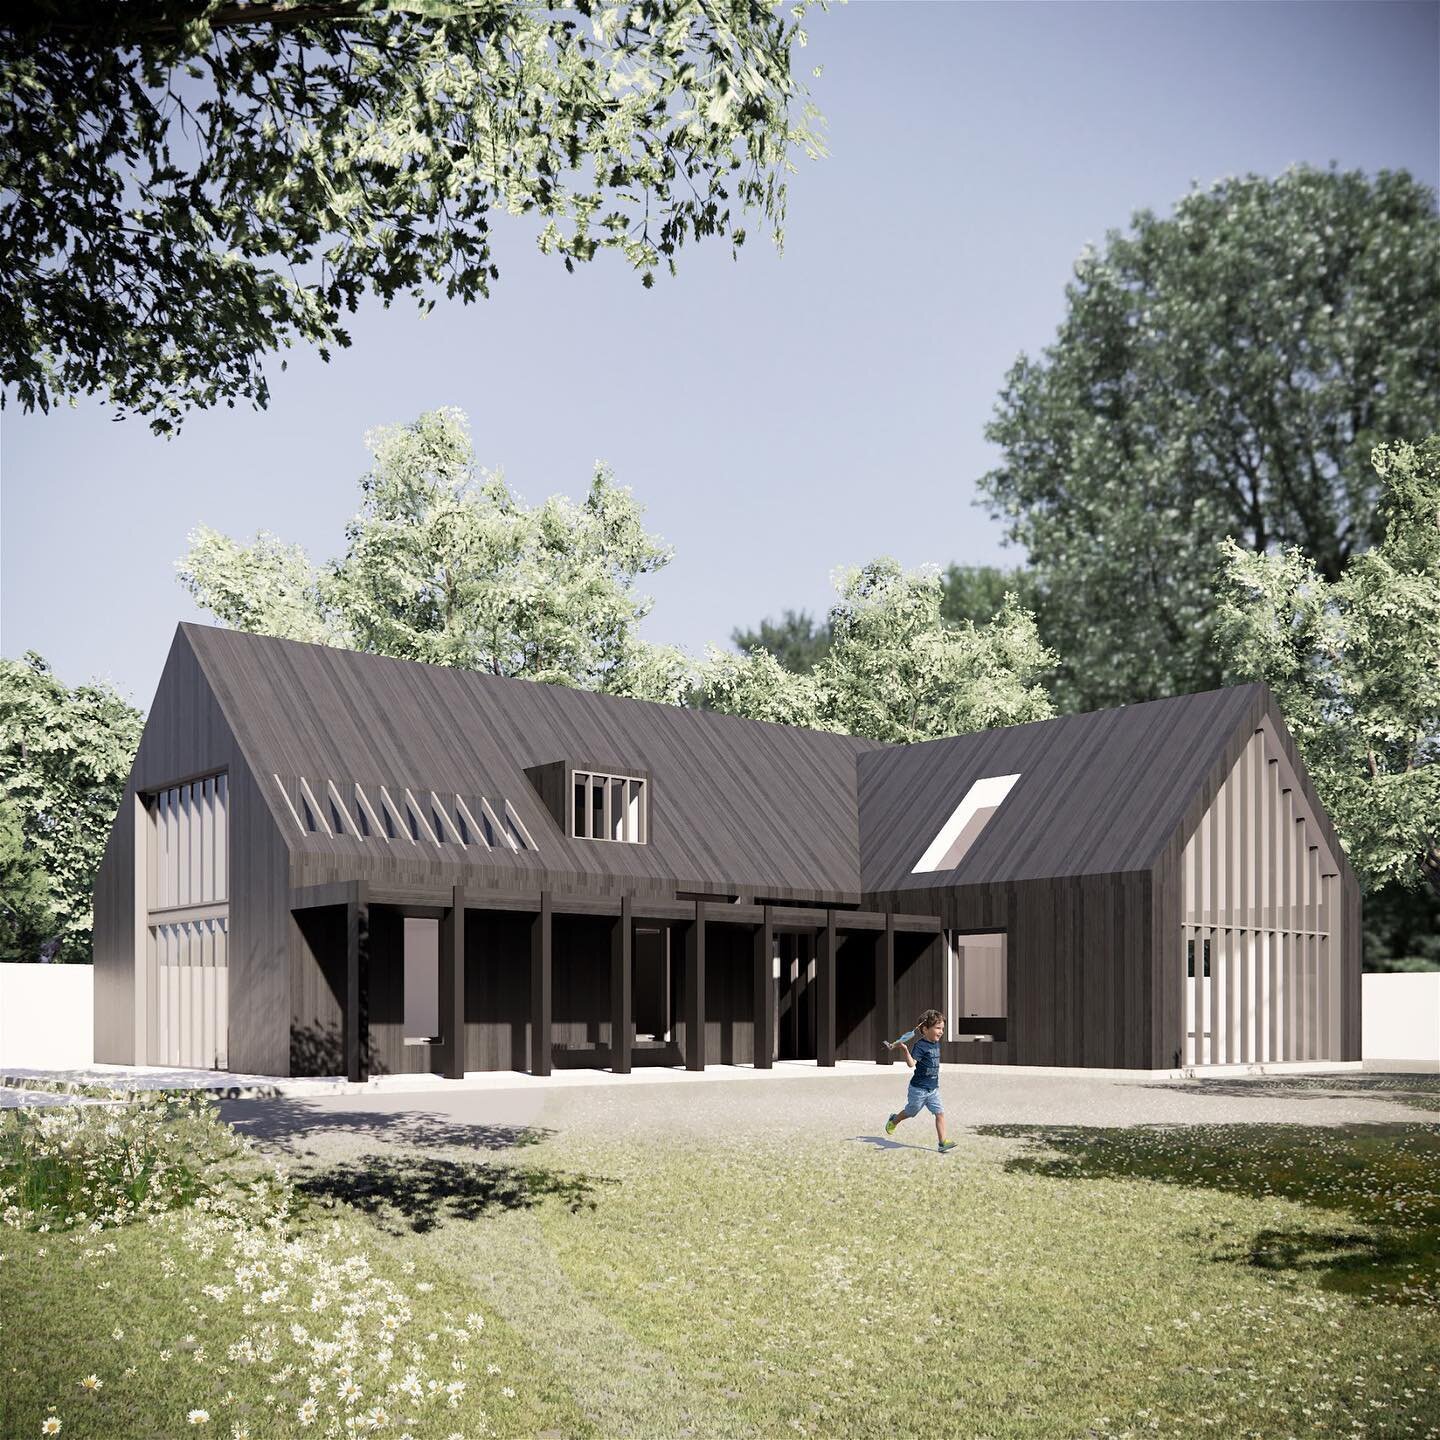 Planning permission awarded for a contemporary family home in Hertfordshire. Really exciting project for us to be involved with. #contemporaryhouse #architecture